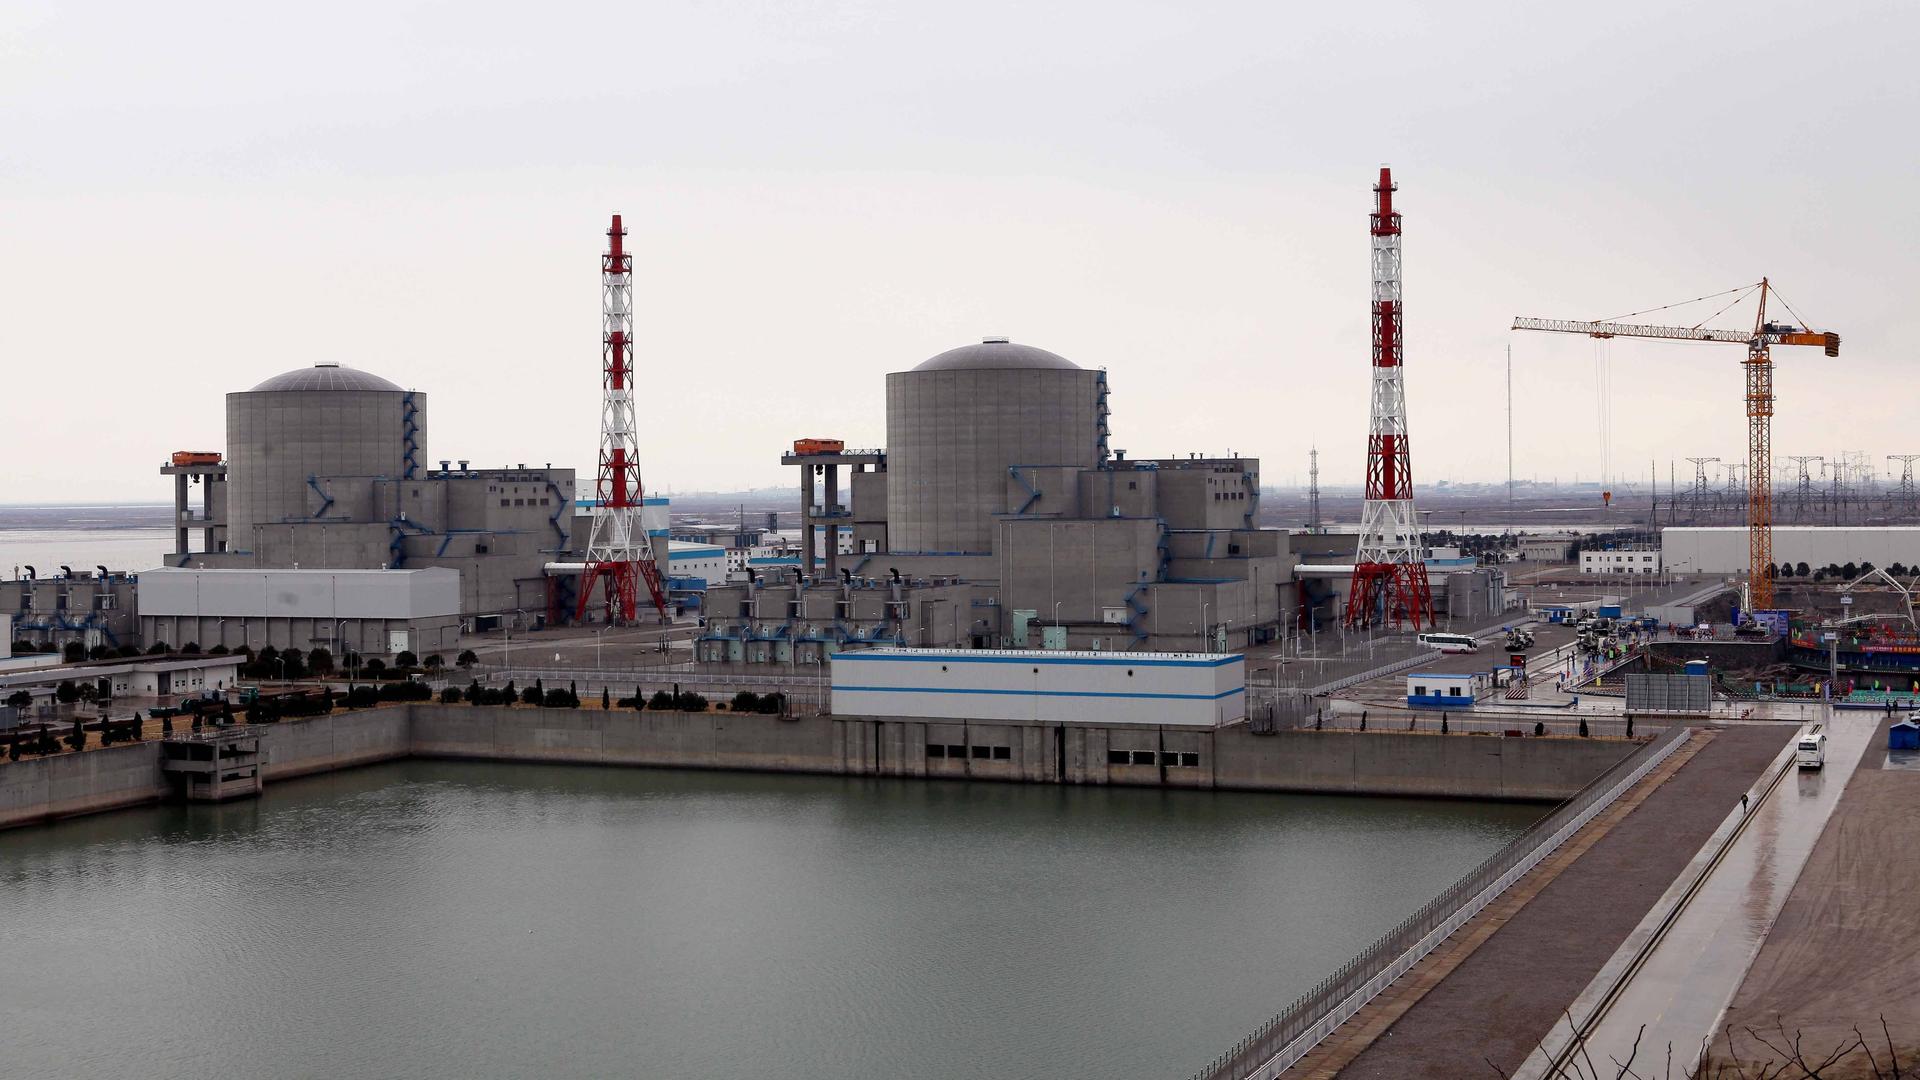 Bildnummer: 58953837  Datum: 27.12.2012  Copyright: imago/China Foto PressLIANYUNGANG, CHINA - DECEMBER 27: (CHINA OUT) A general view of Phase 1 of the Tianwan Nuclear Power Plant on December 27, 2012 in Lianyungang, Jiangsu Province of China. The second phase of Tianwan Nuclear Power Plant, which consists of two Russian-designed 1060 MWe VVER-1000 pressurized water reactors, started construction on Thursday. PUBLICATIONxINxGERxSUIxAUTxHUNxONLY Wirtschaft Energie Atomenergie AKW Reaktor Bau Neubau premiumd xmk x0x 2012 quer  58953837 Date 27 12 2012 Copyright Imago China Photo Press Lianyungang China December 27 China out a General View of Phase 1 of The Tianwan Nuclear Power plant ON December 27 2012 in Lianyungang Jiangsu Province of China The Second Phase of Tianwan Nuclear Power plant Which consists of Two Russian designed   VVER 1000 Pressurized Water  started Construction ON Thursday PUBLICATIONxINxGERxSUIxAUTxHUNxONLY Economy Energy Atomic Energy NPP Reactor Construction Building premiumd xmk x0x 2012 horizontal